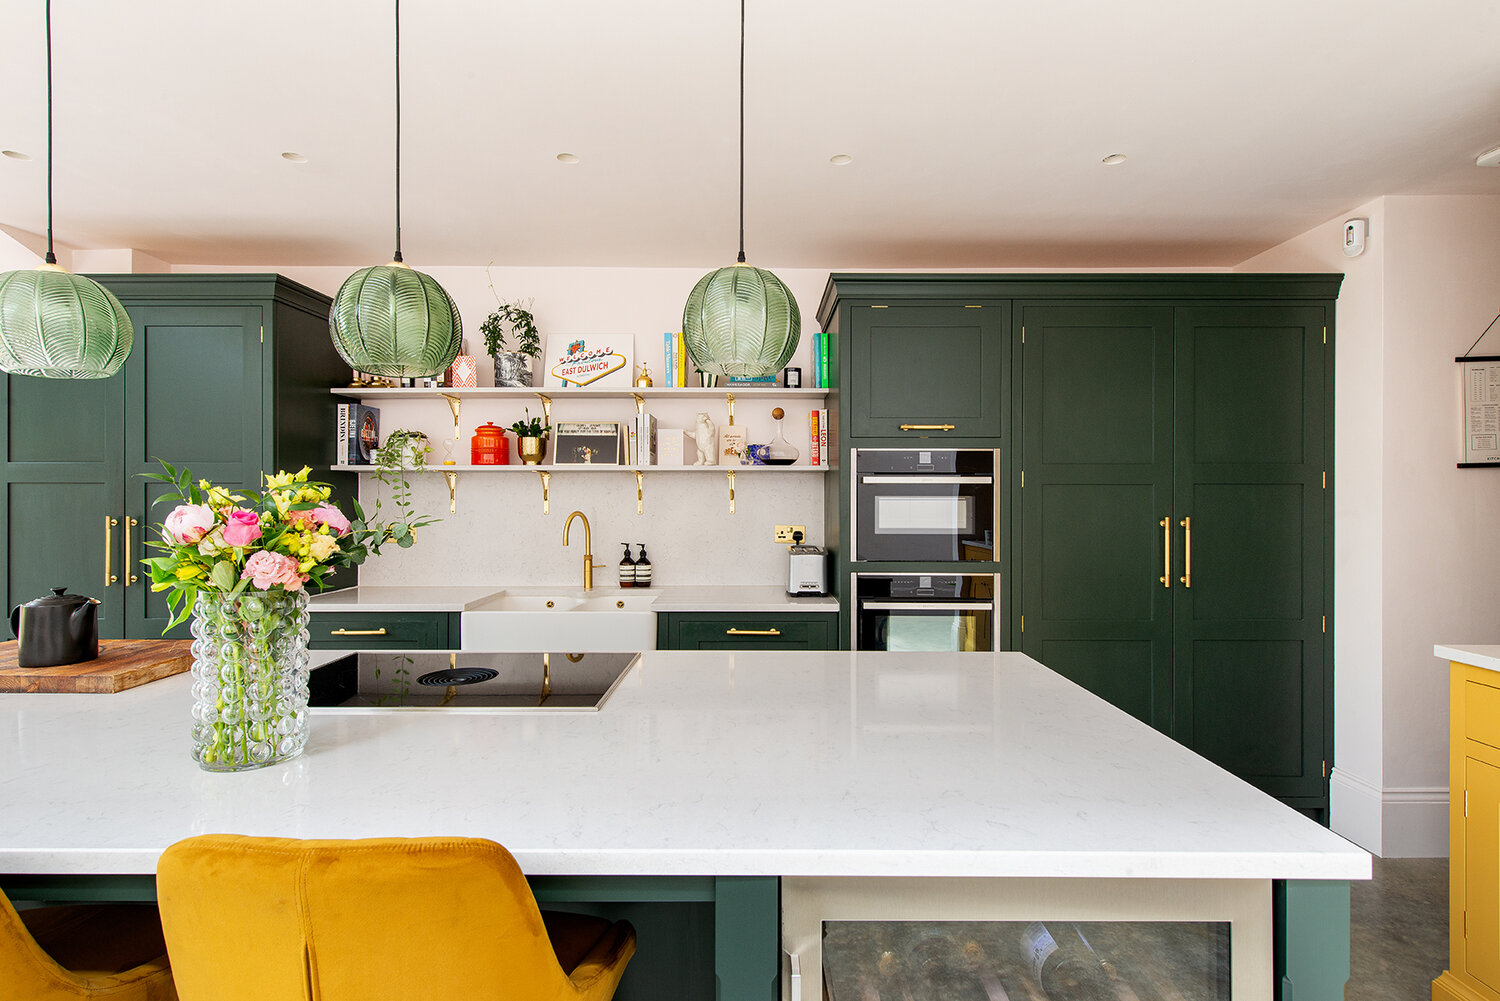 Green Kitchens - 3 Inspiring and Unique Green Kitchen Ideas